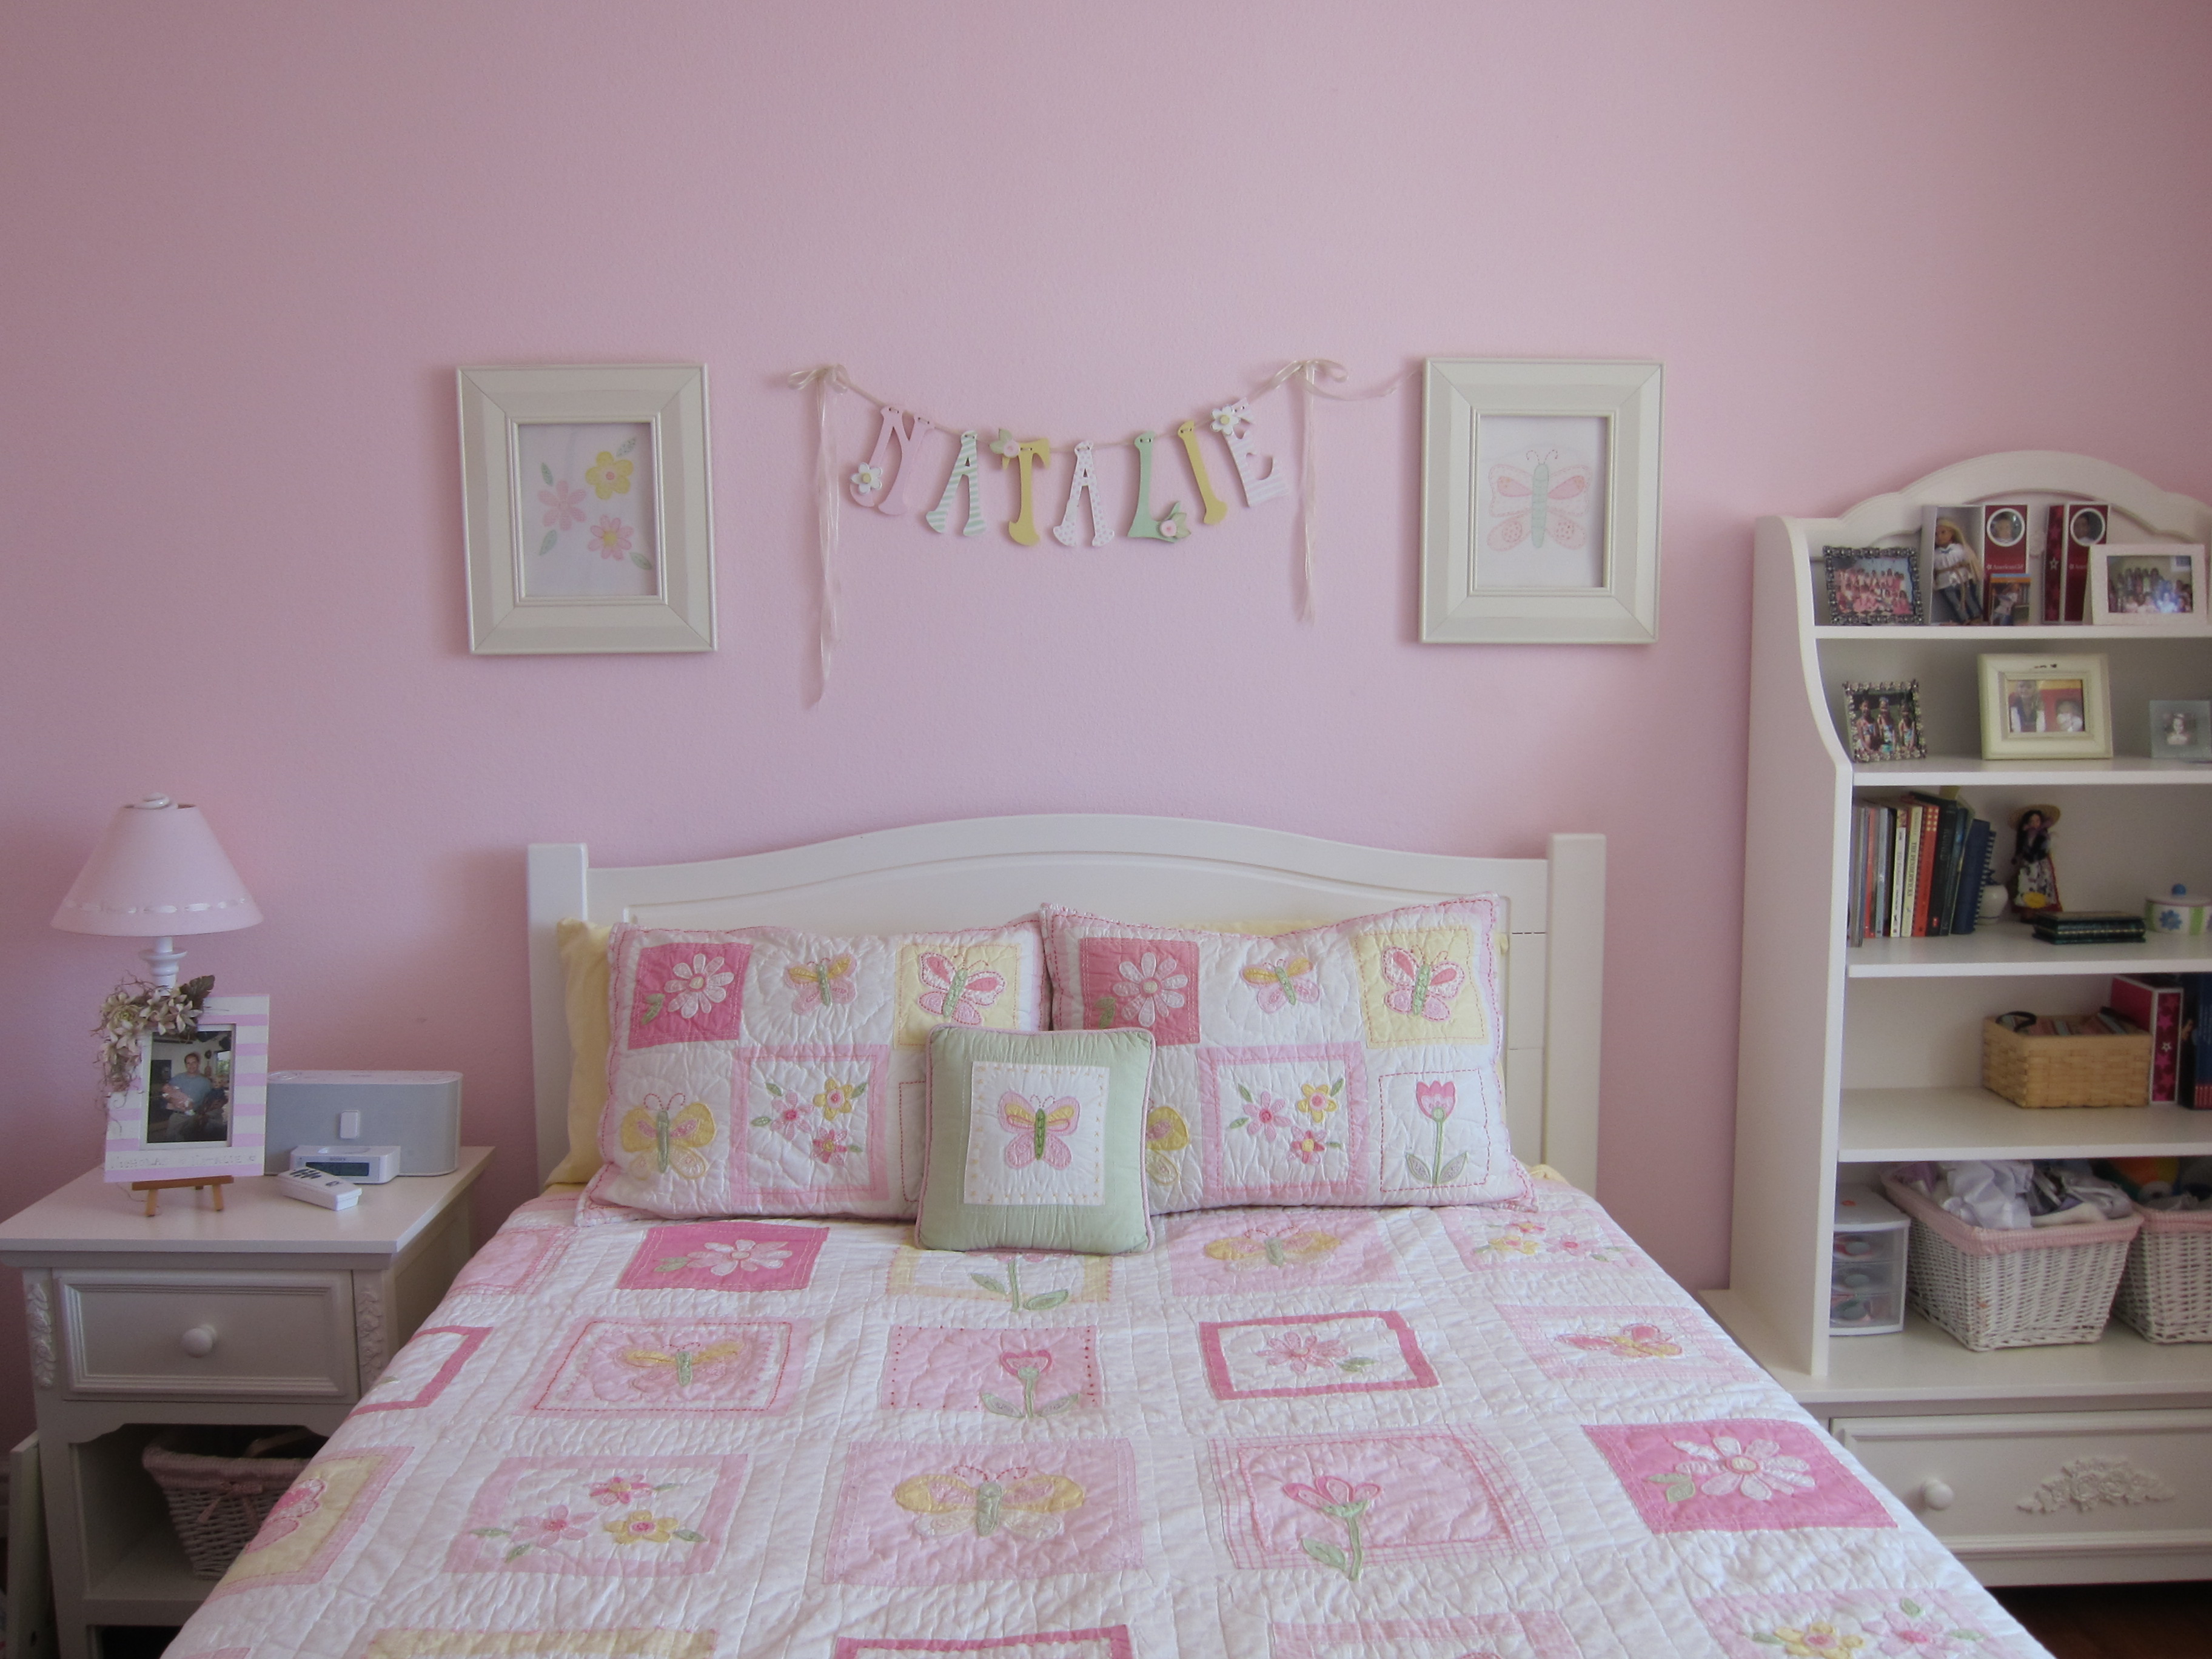 She had a pale pink room with PB Kids bedding of flowers amp; butterflies 